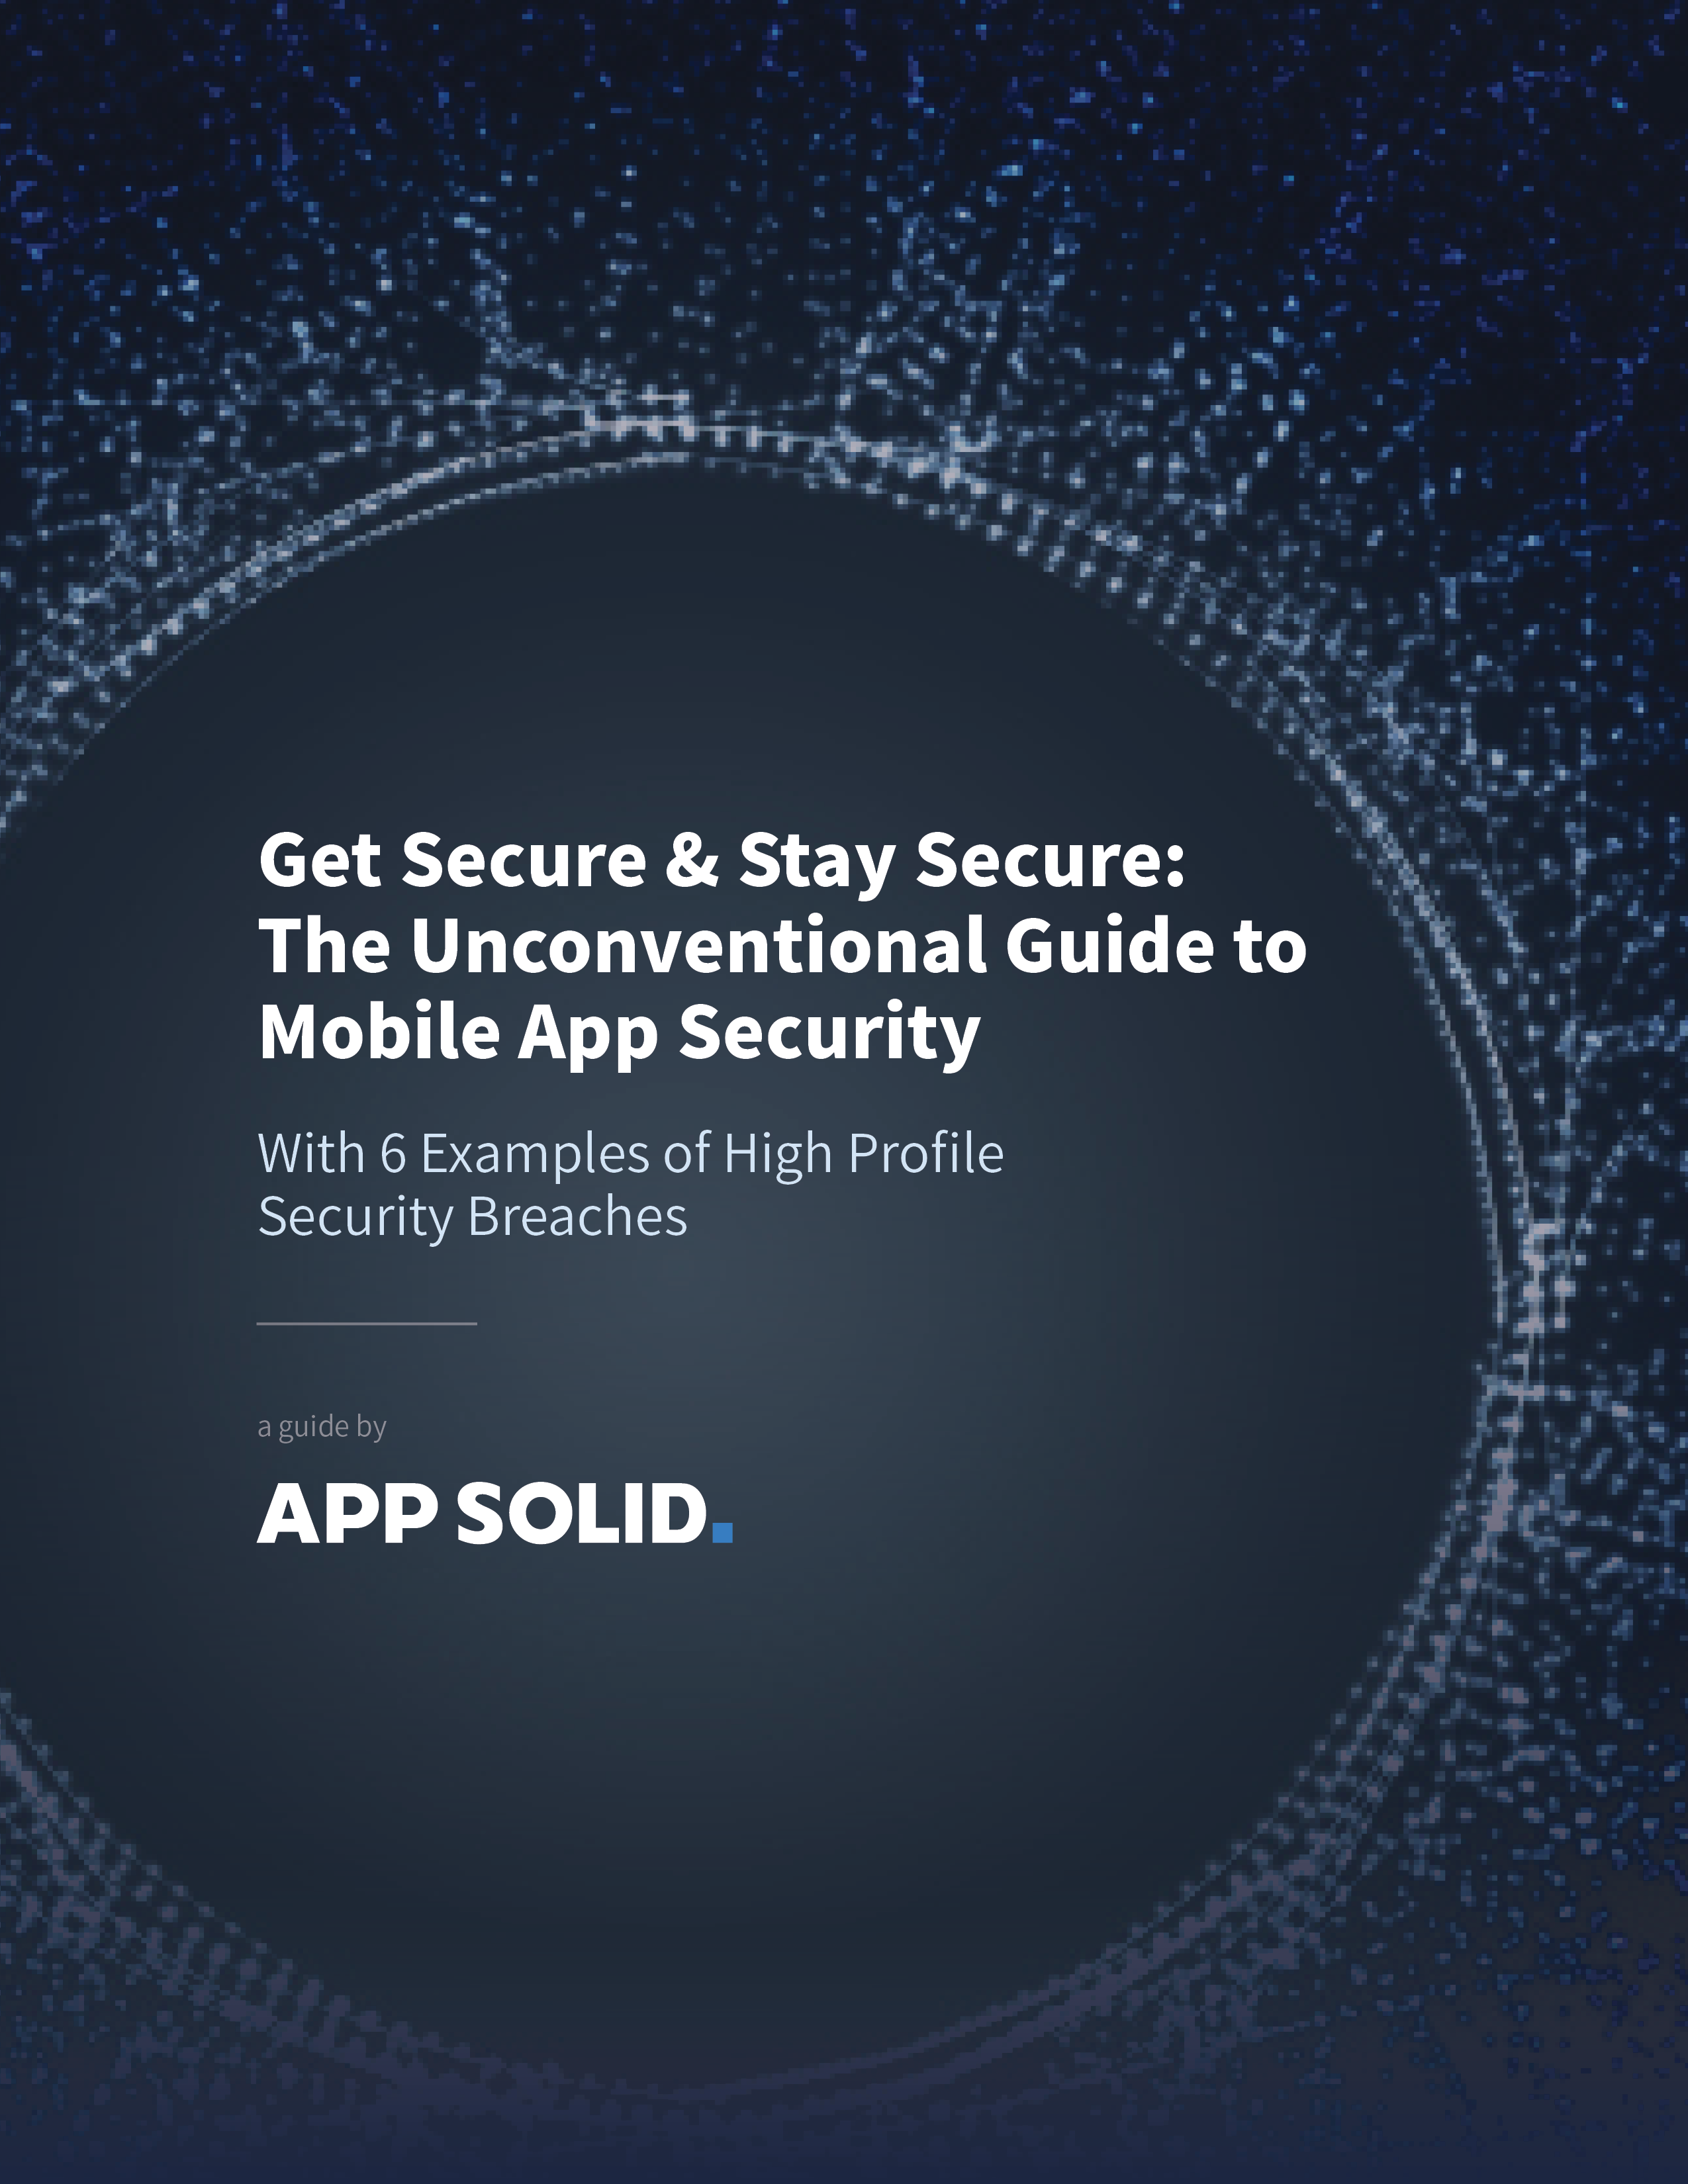 eBook-The-Unconventional-Guide-to-Mobile-Application-Security.png